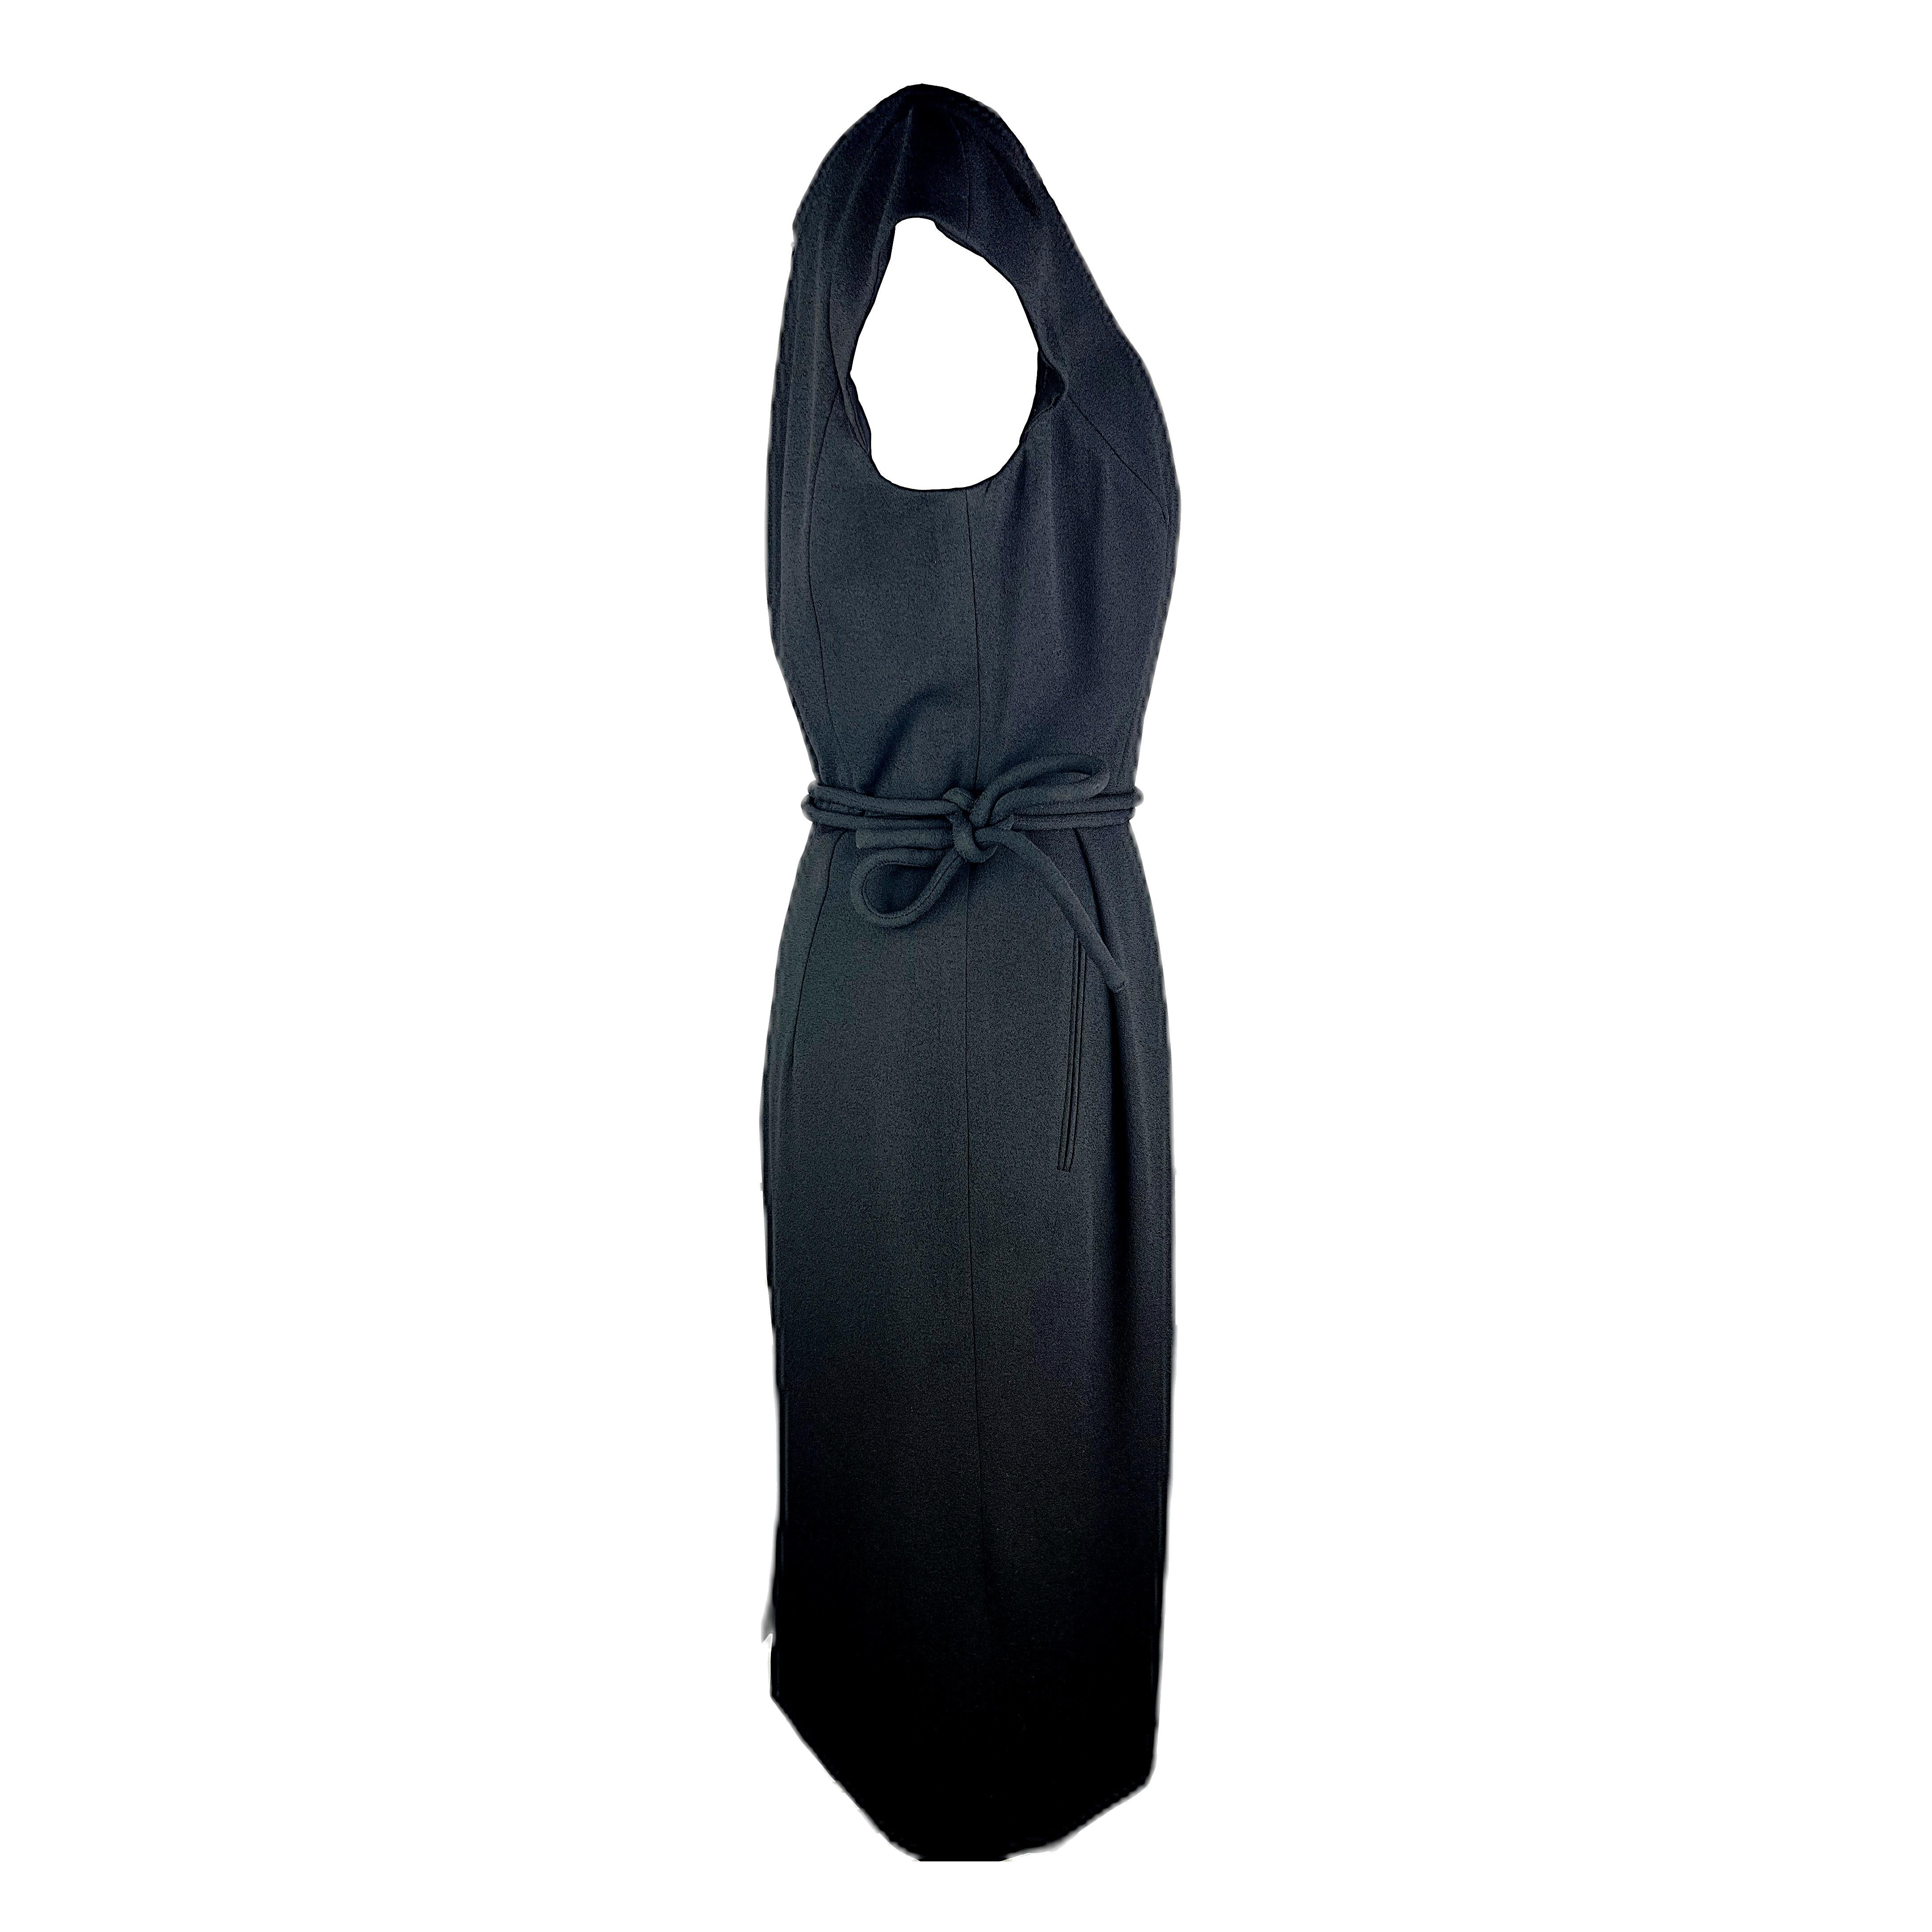 Here is a classic piece in Armani's design style: it's a blouson dress with a beautiful waist belt that can be tied either on the front or right hand side. The fabric is a black synthetic crepe and the dress is fully lined with fine sewings.